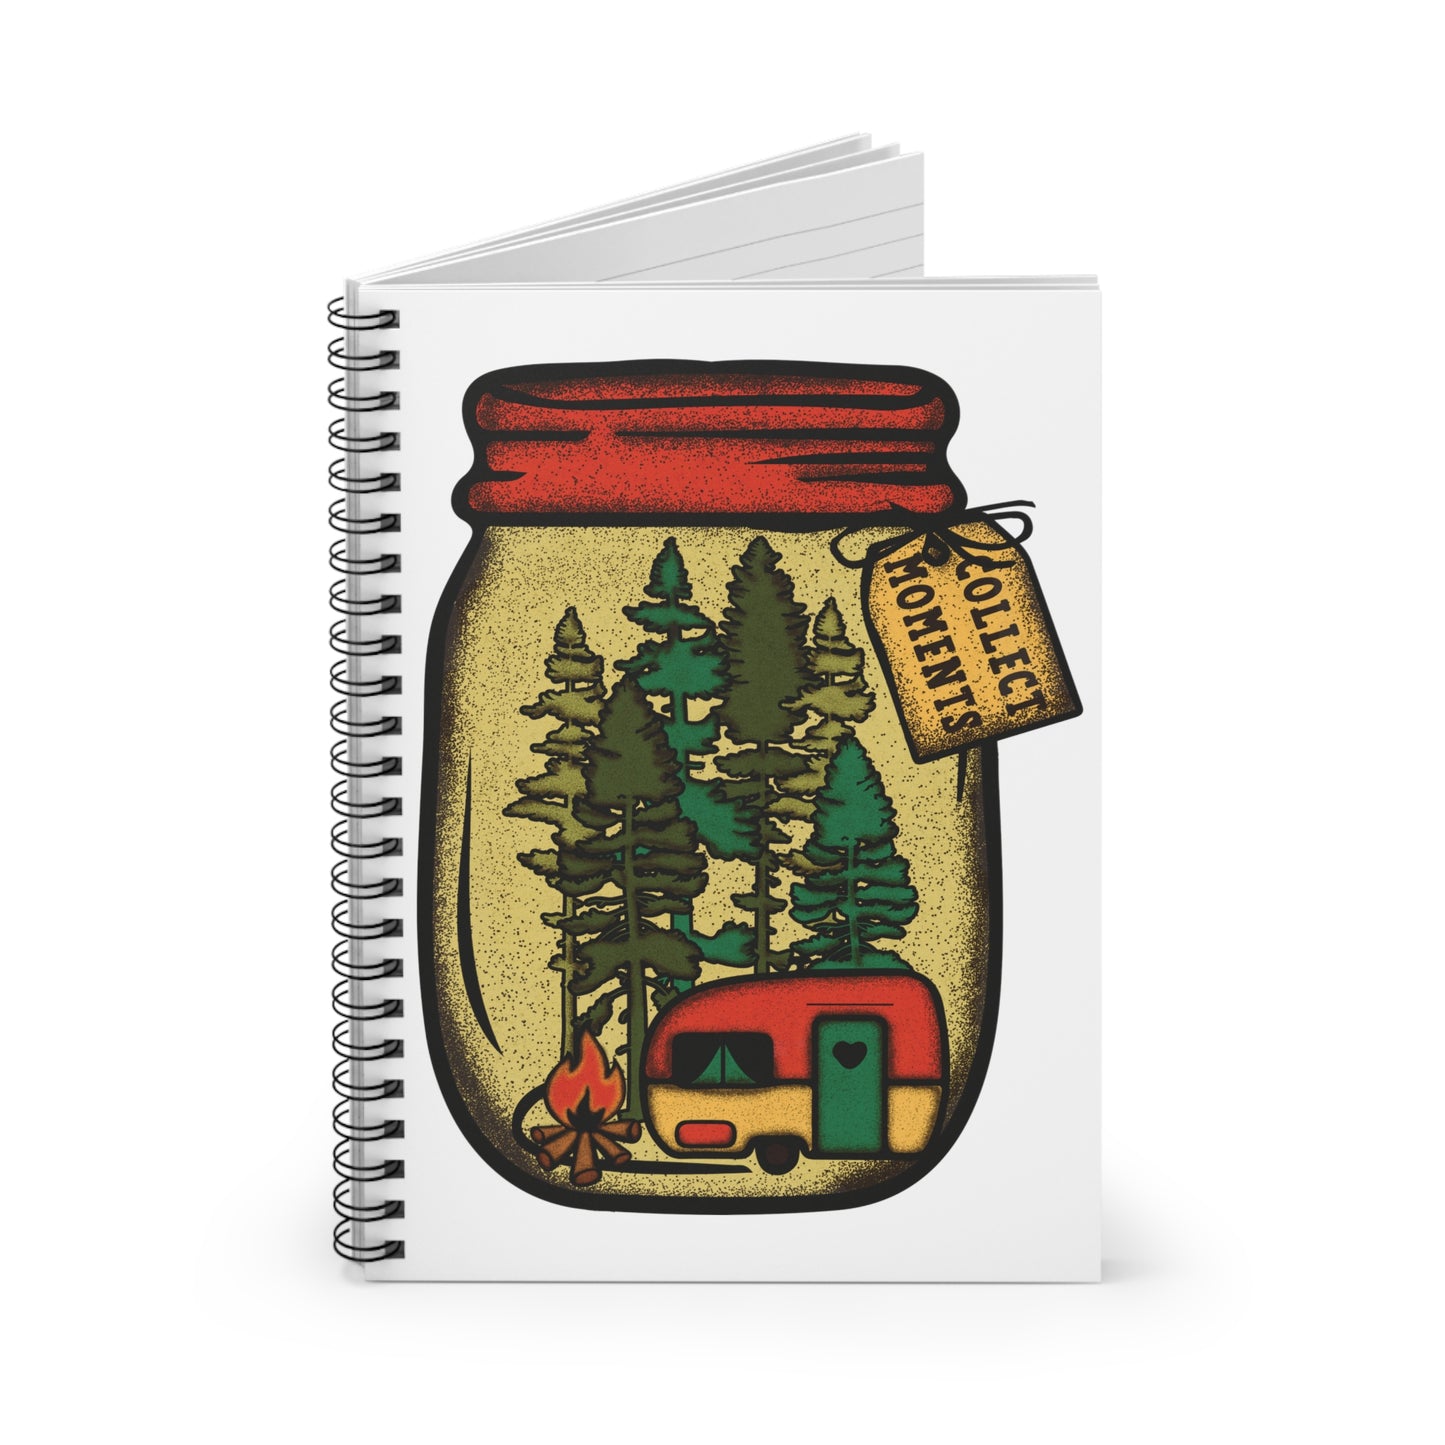 Camping Jar: Spiral Notebook - Log Books - Journals - Diaries - and More Custom Printed by TheGlassyLass